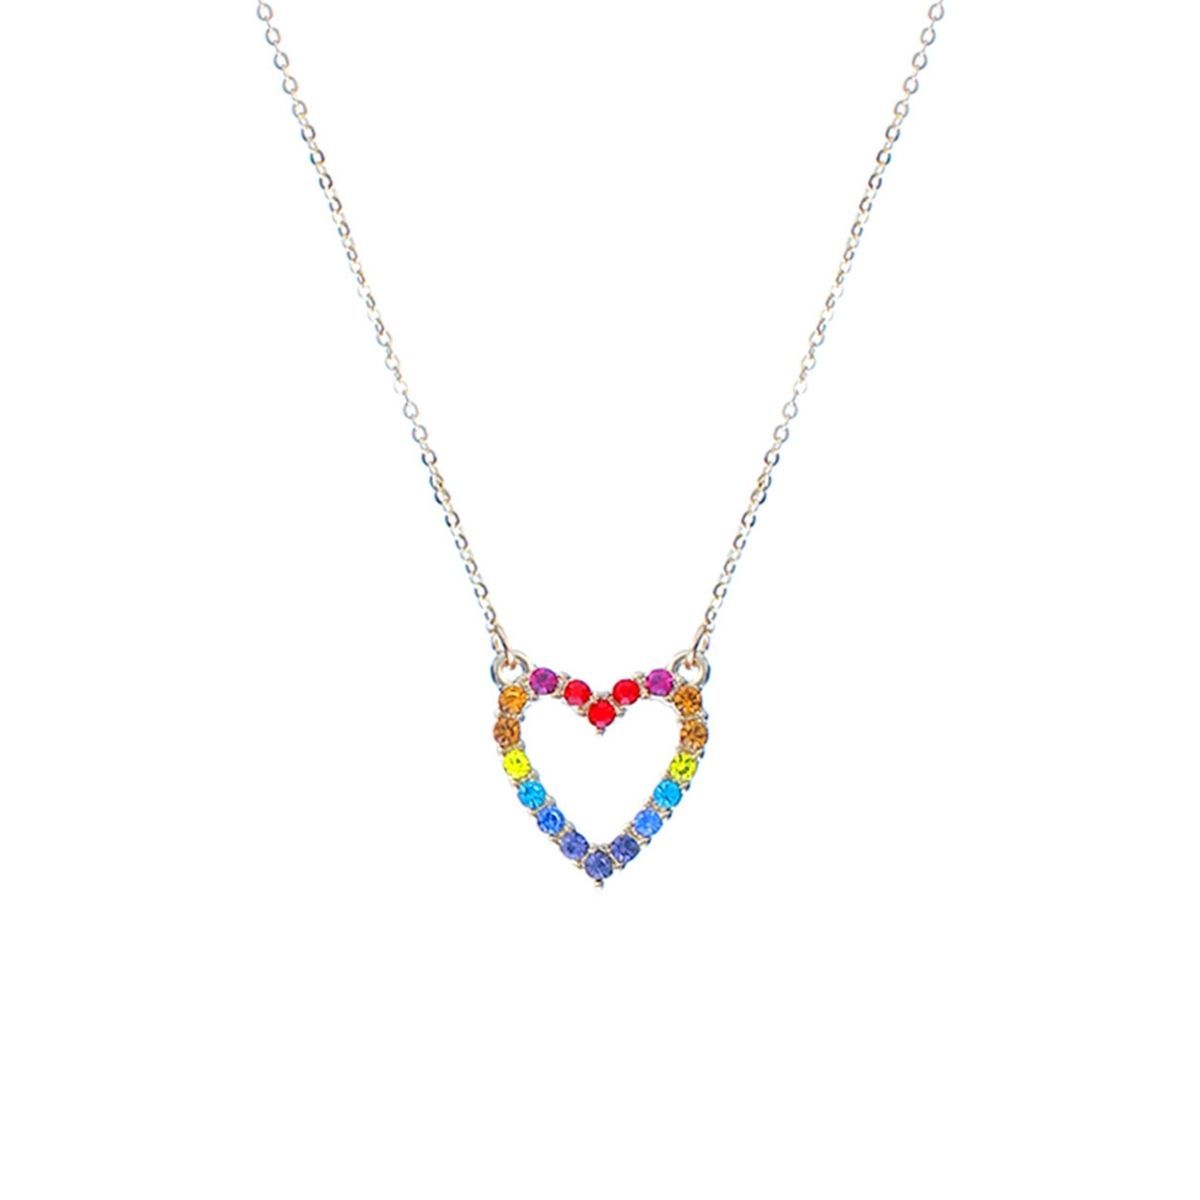 Rainbow Heart Gold Chain Necklace